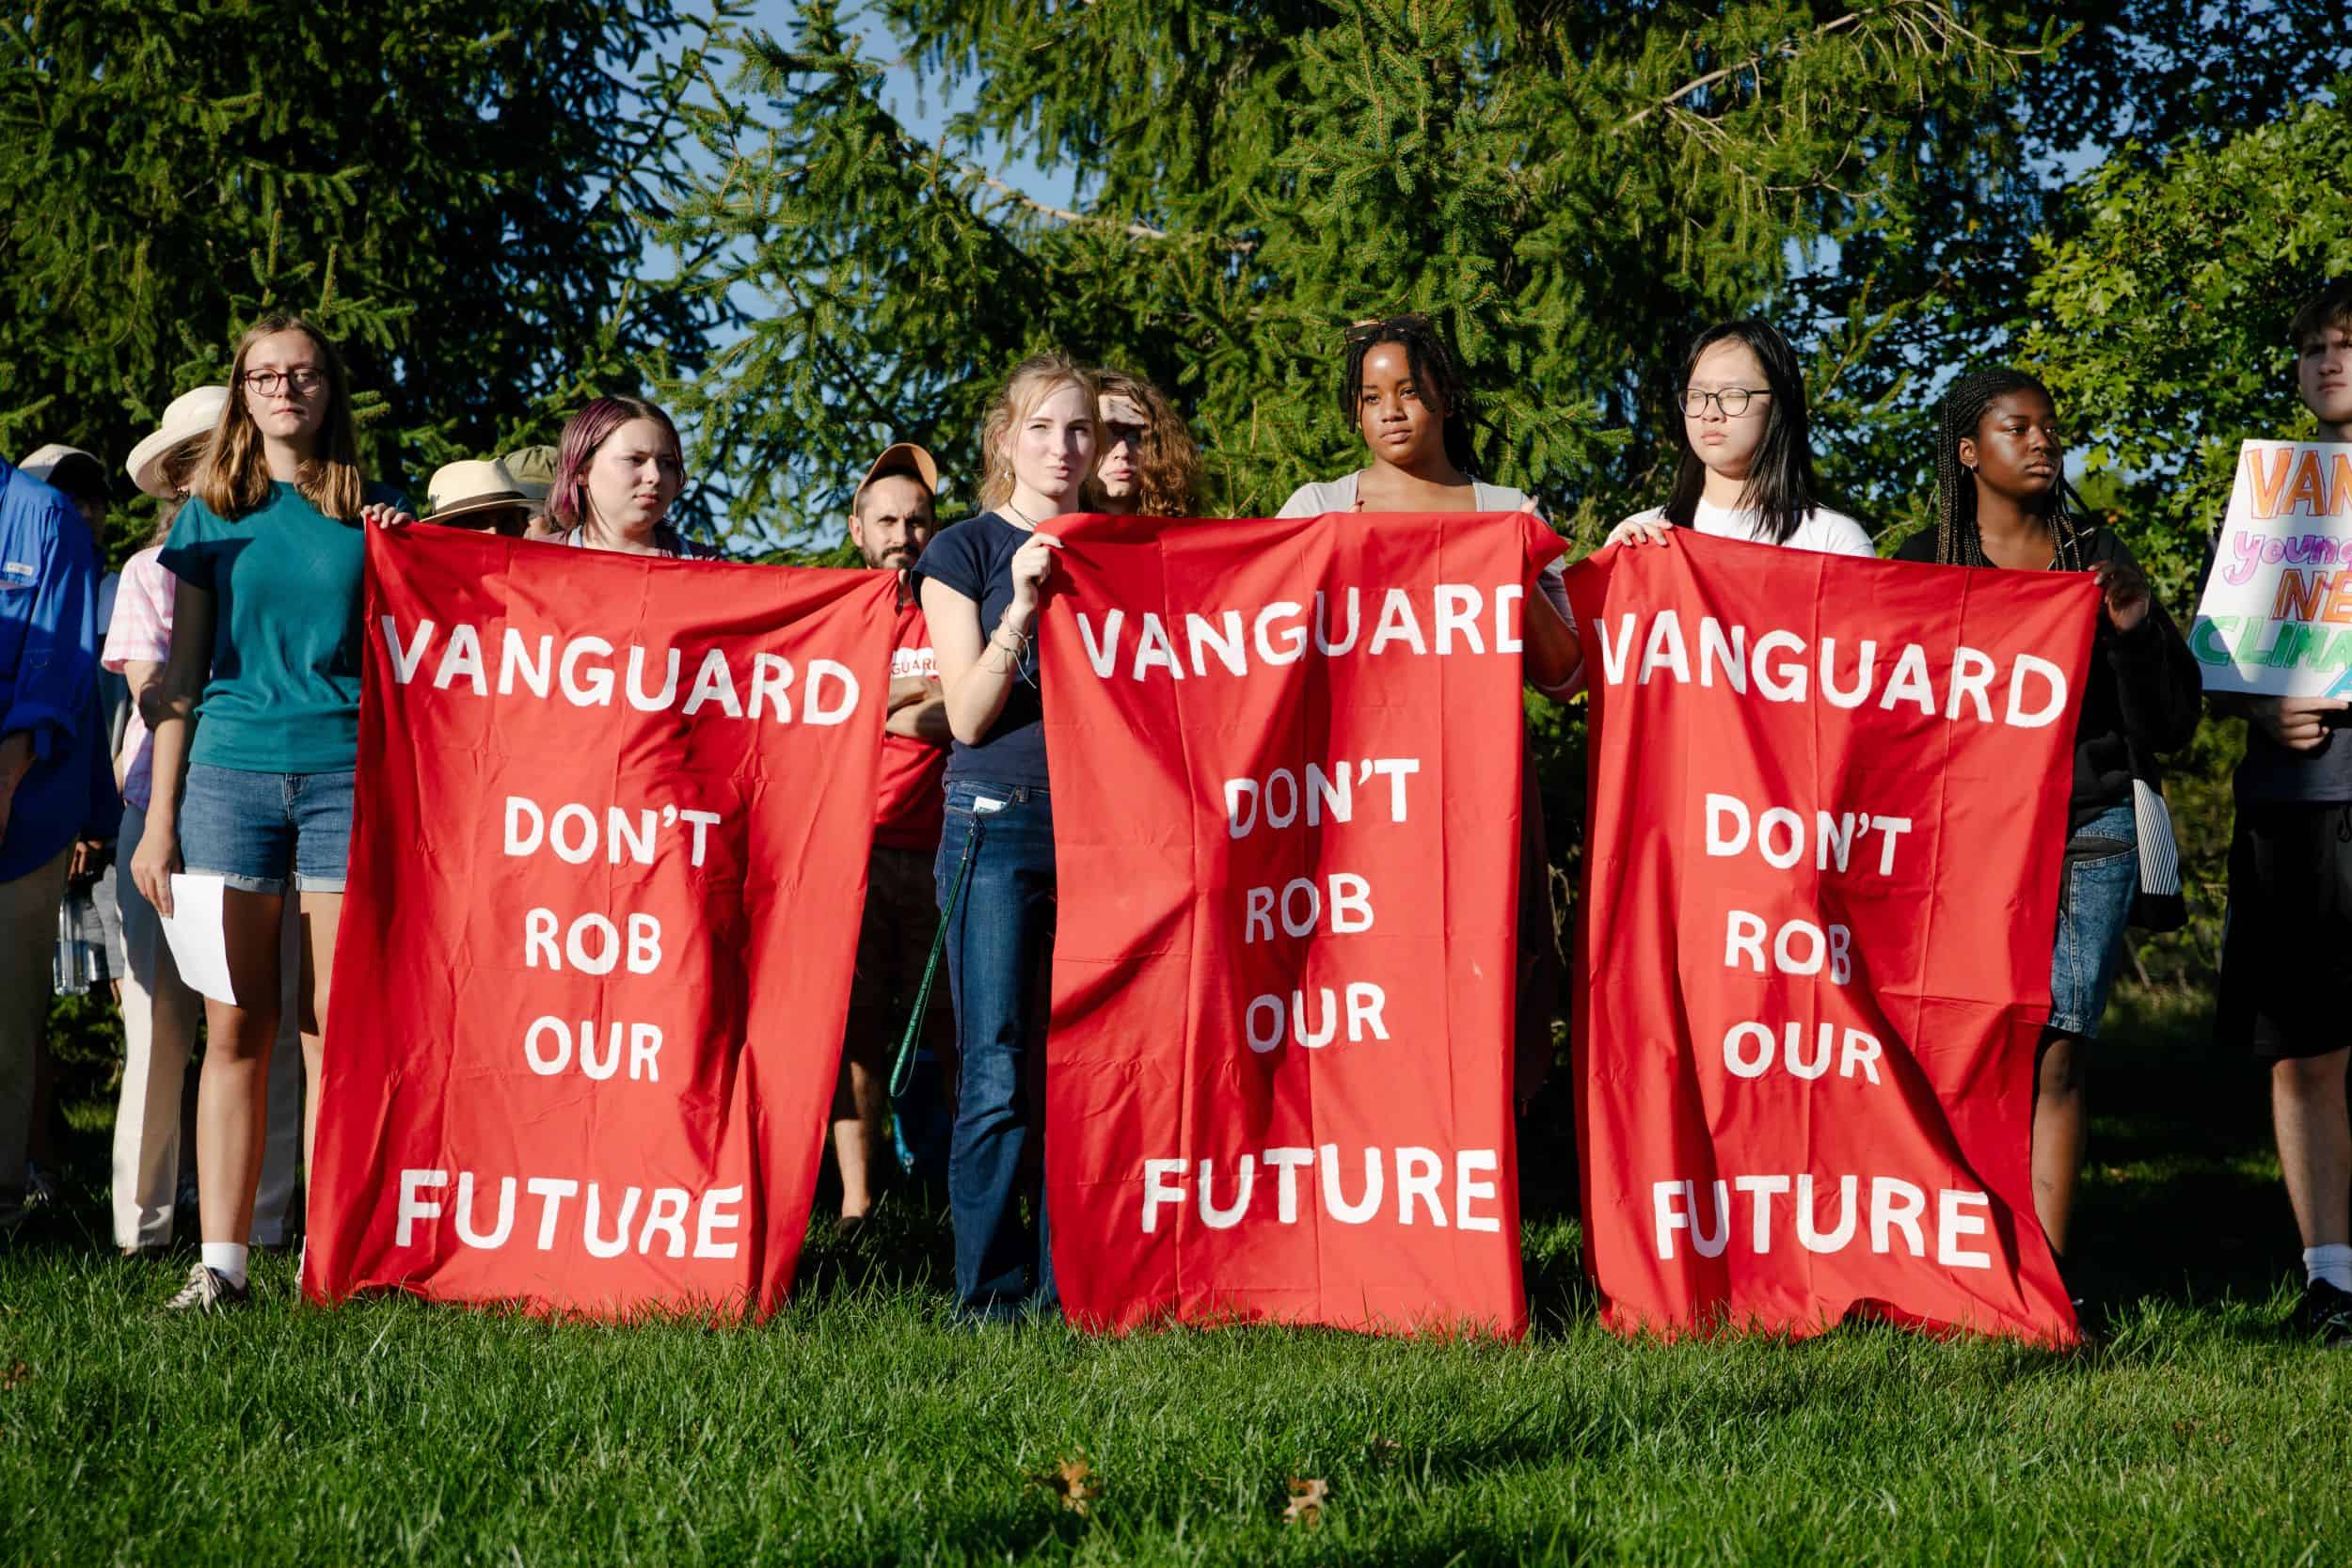 A dozen people stand outside on green grass in front of green trees. 6 people are holding 3 red banners with white text that each say "Vanguard don't rob our future."